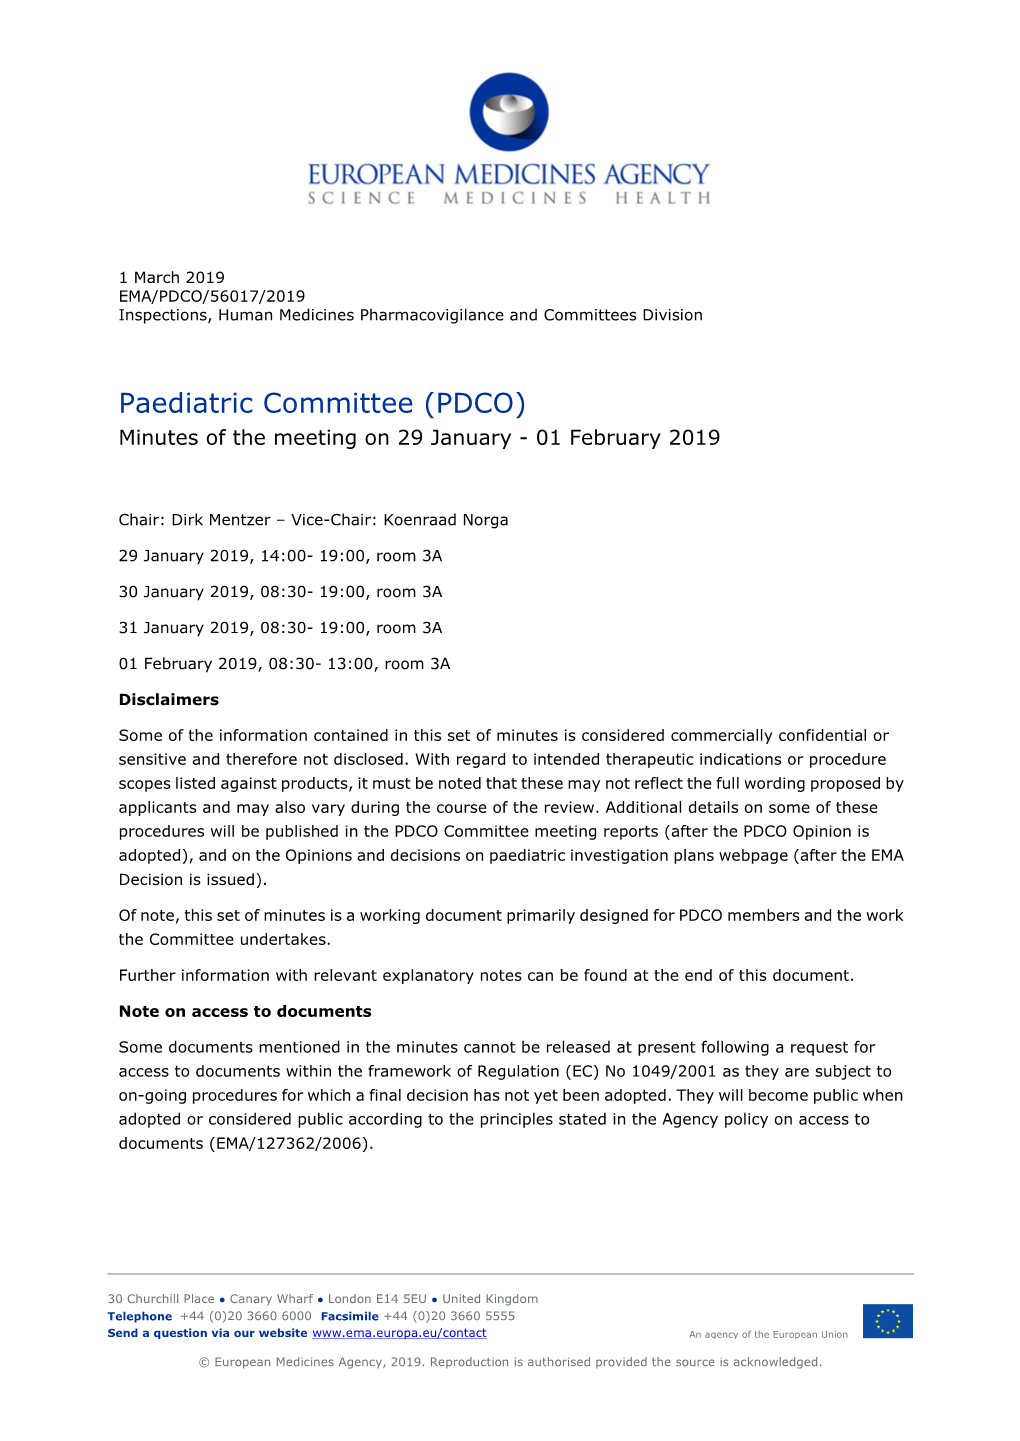 (PDCO) Minutes of the Meeting on 29 January - 01 February 2019